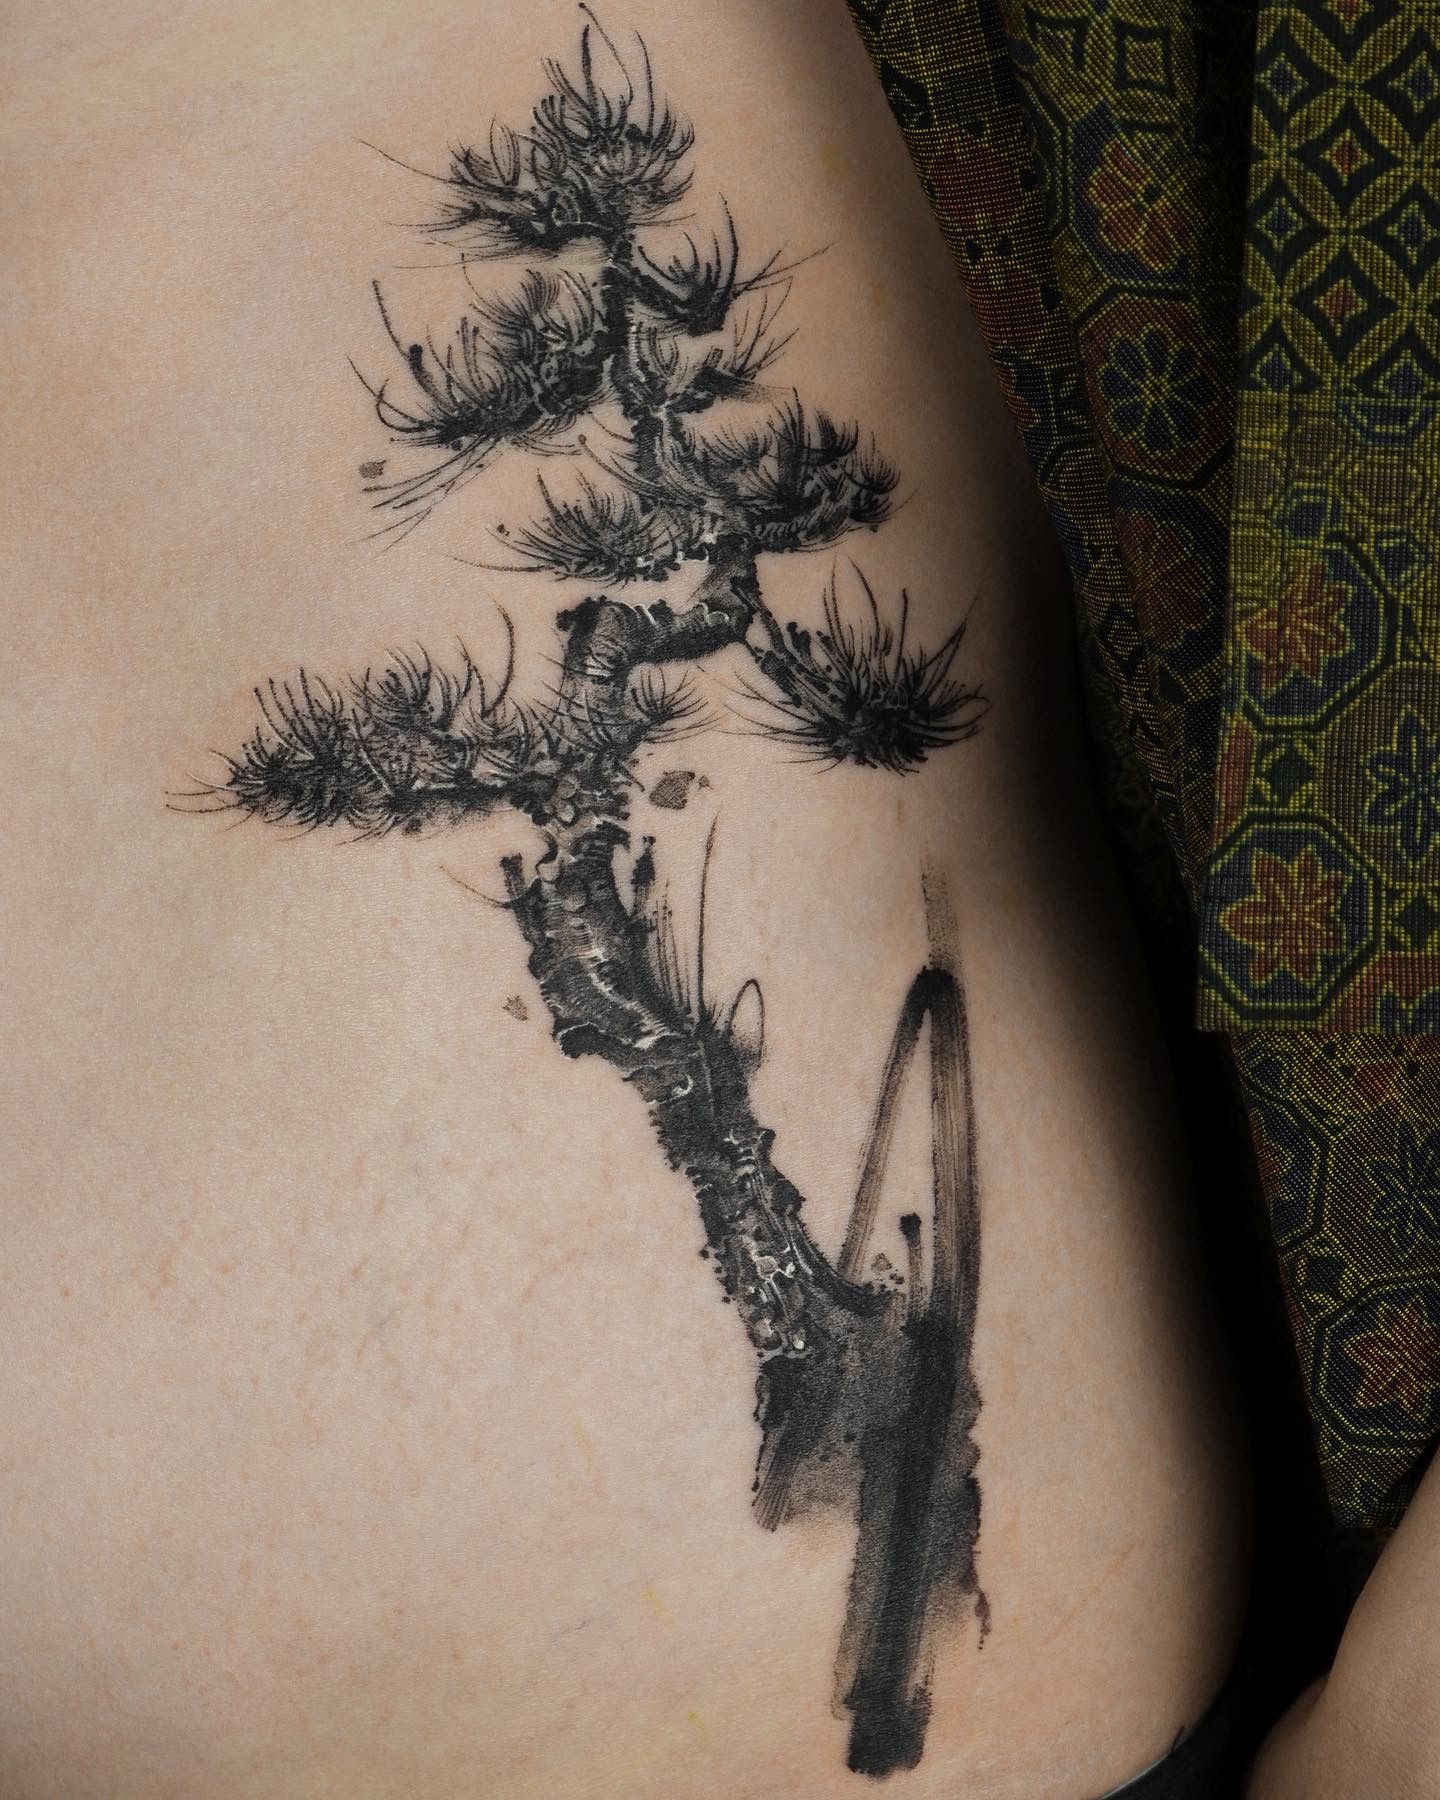 Pure Steam Tattoo  The twisting motion of this tree was loosely inspired  by the twisted bristlecone pine tree which are considered the oldest living  trees on earth  This tattoo was